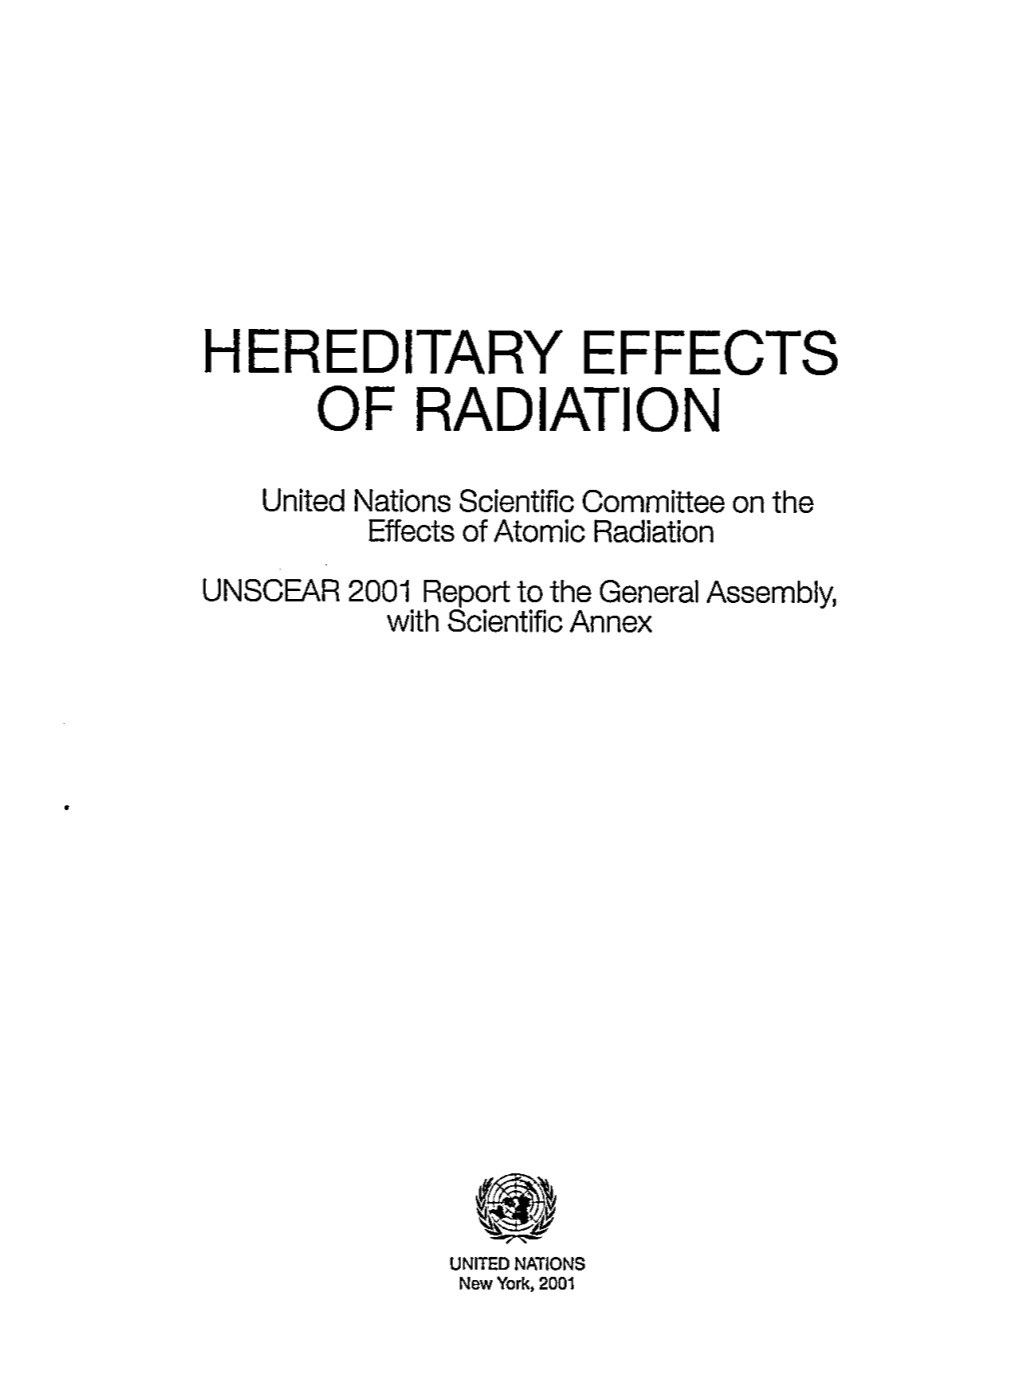 UNSCEAR 2001 Report to the General Assembly, with Scientific Annex